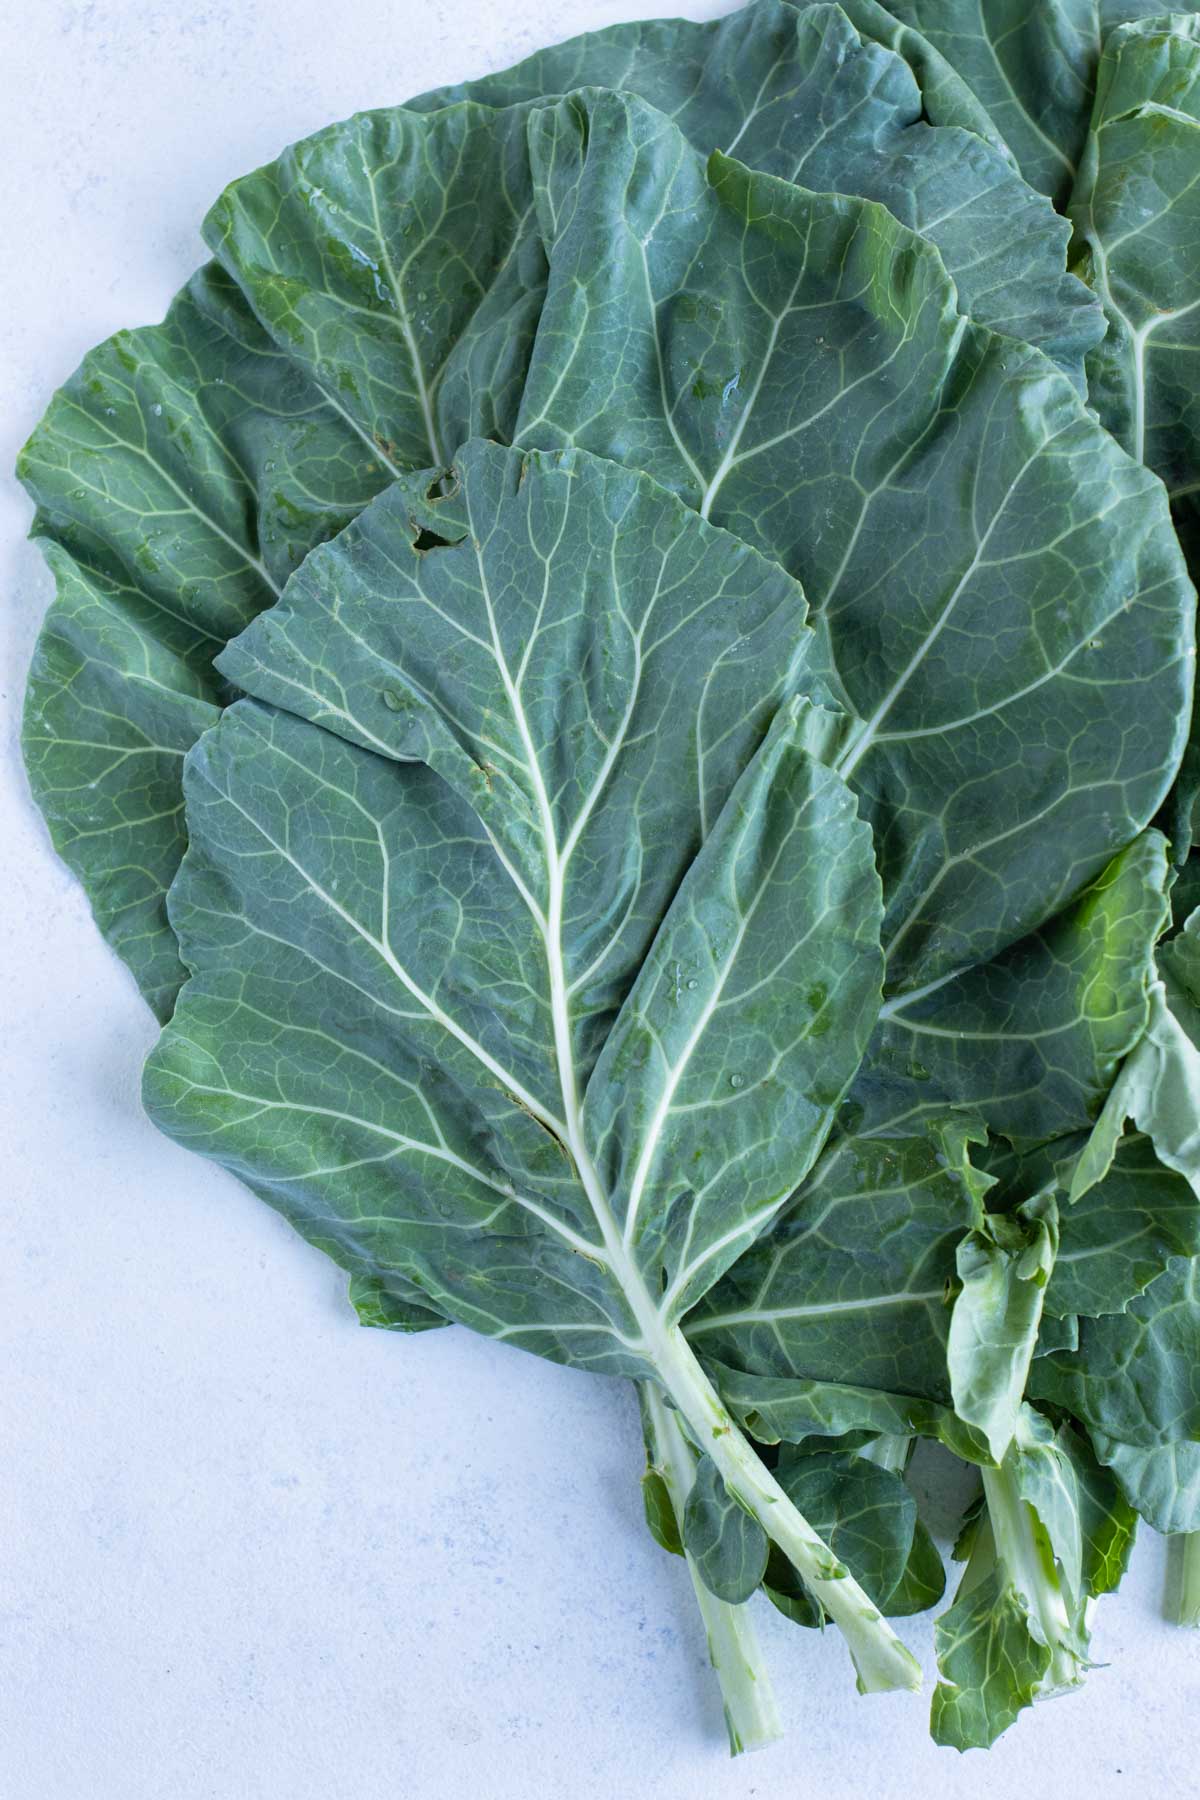 Fresh collard greens are shown on the counter.